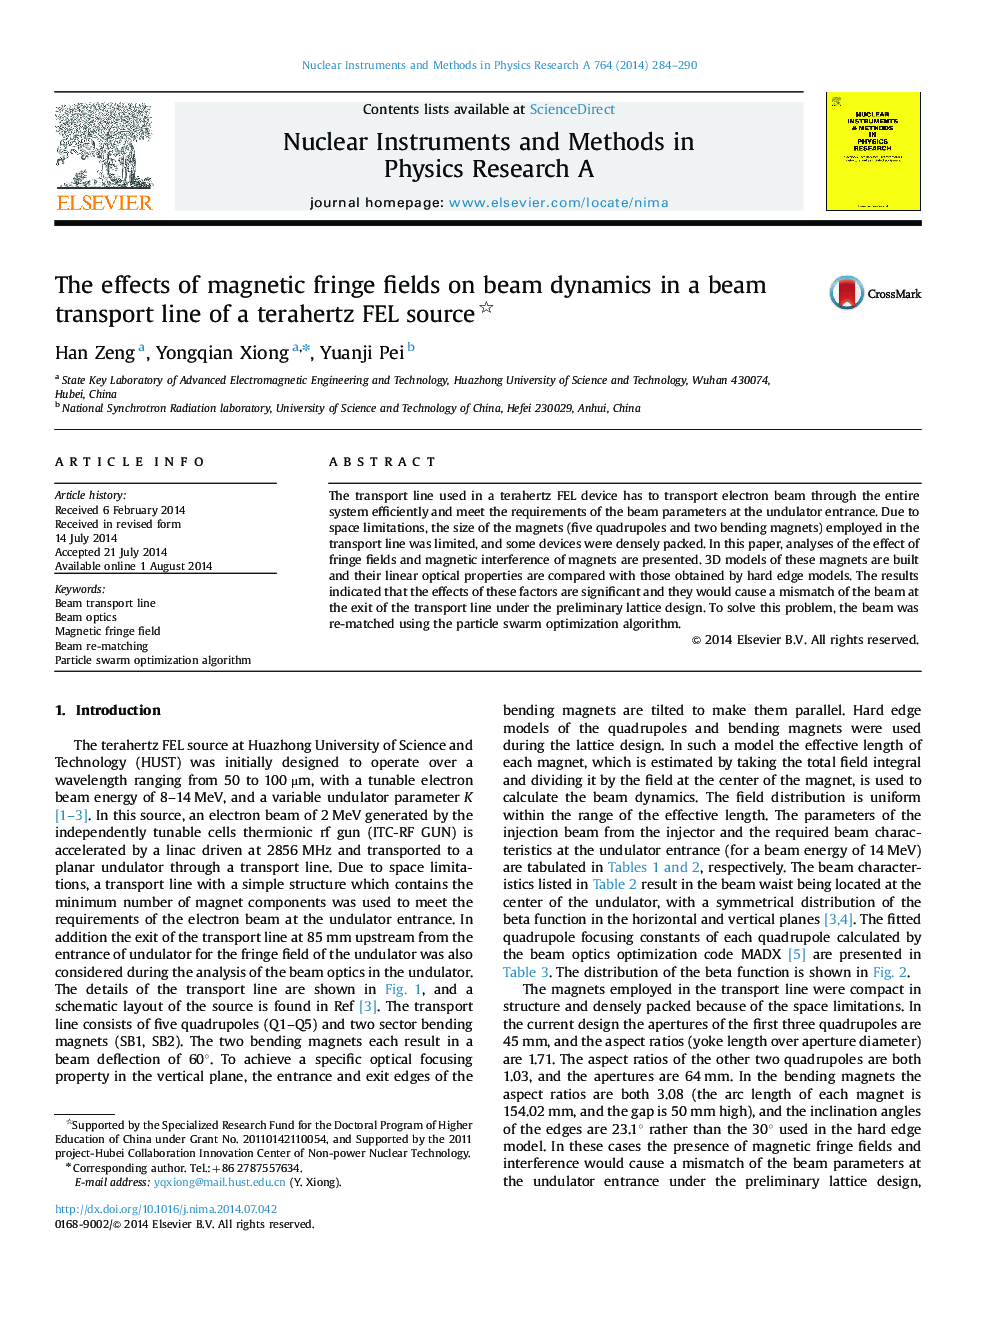 The effects of magnetic fringe fields on beam dynamics in a beam transport line of a terahertz FEL source